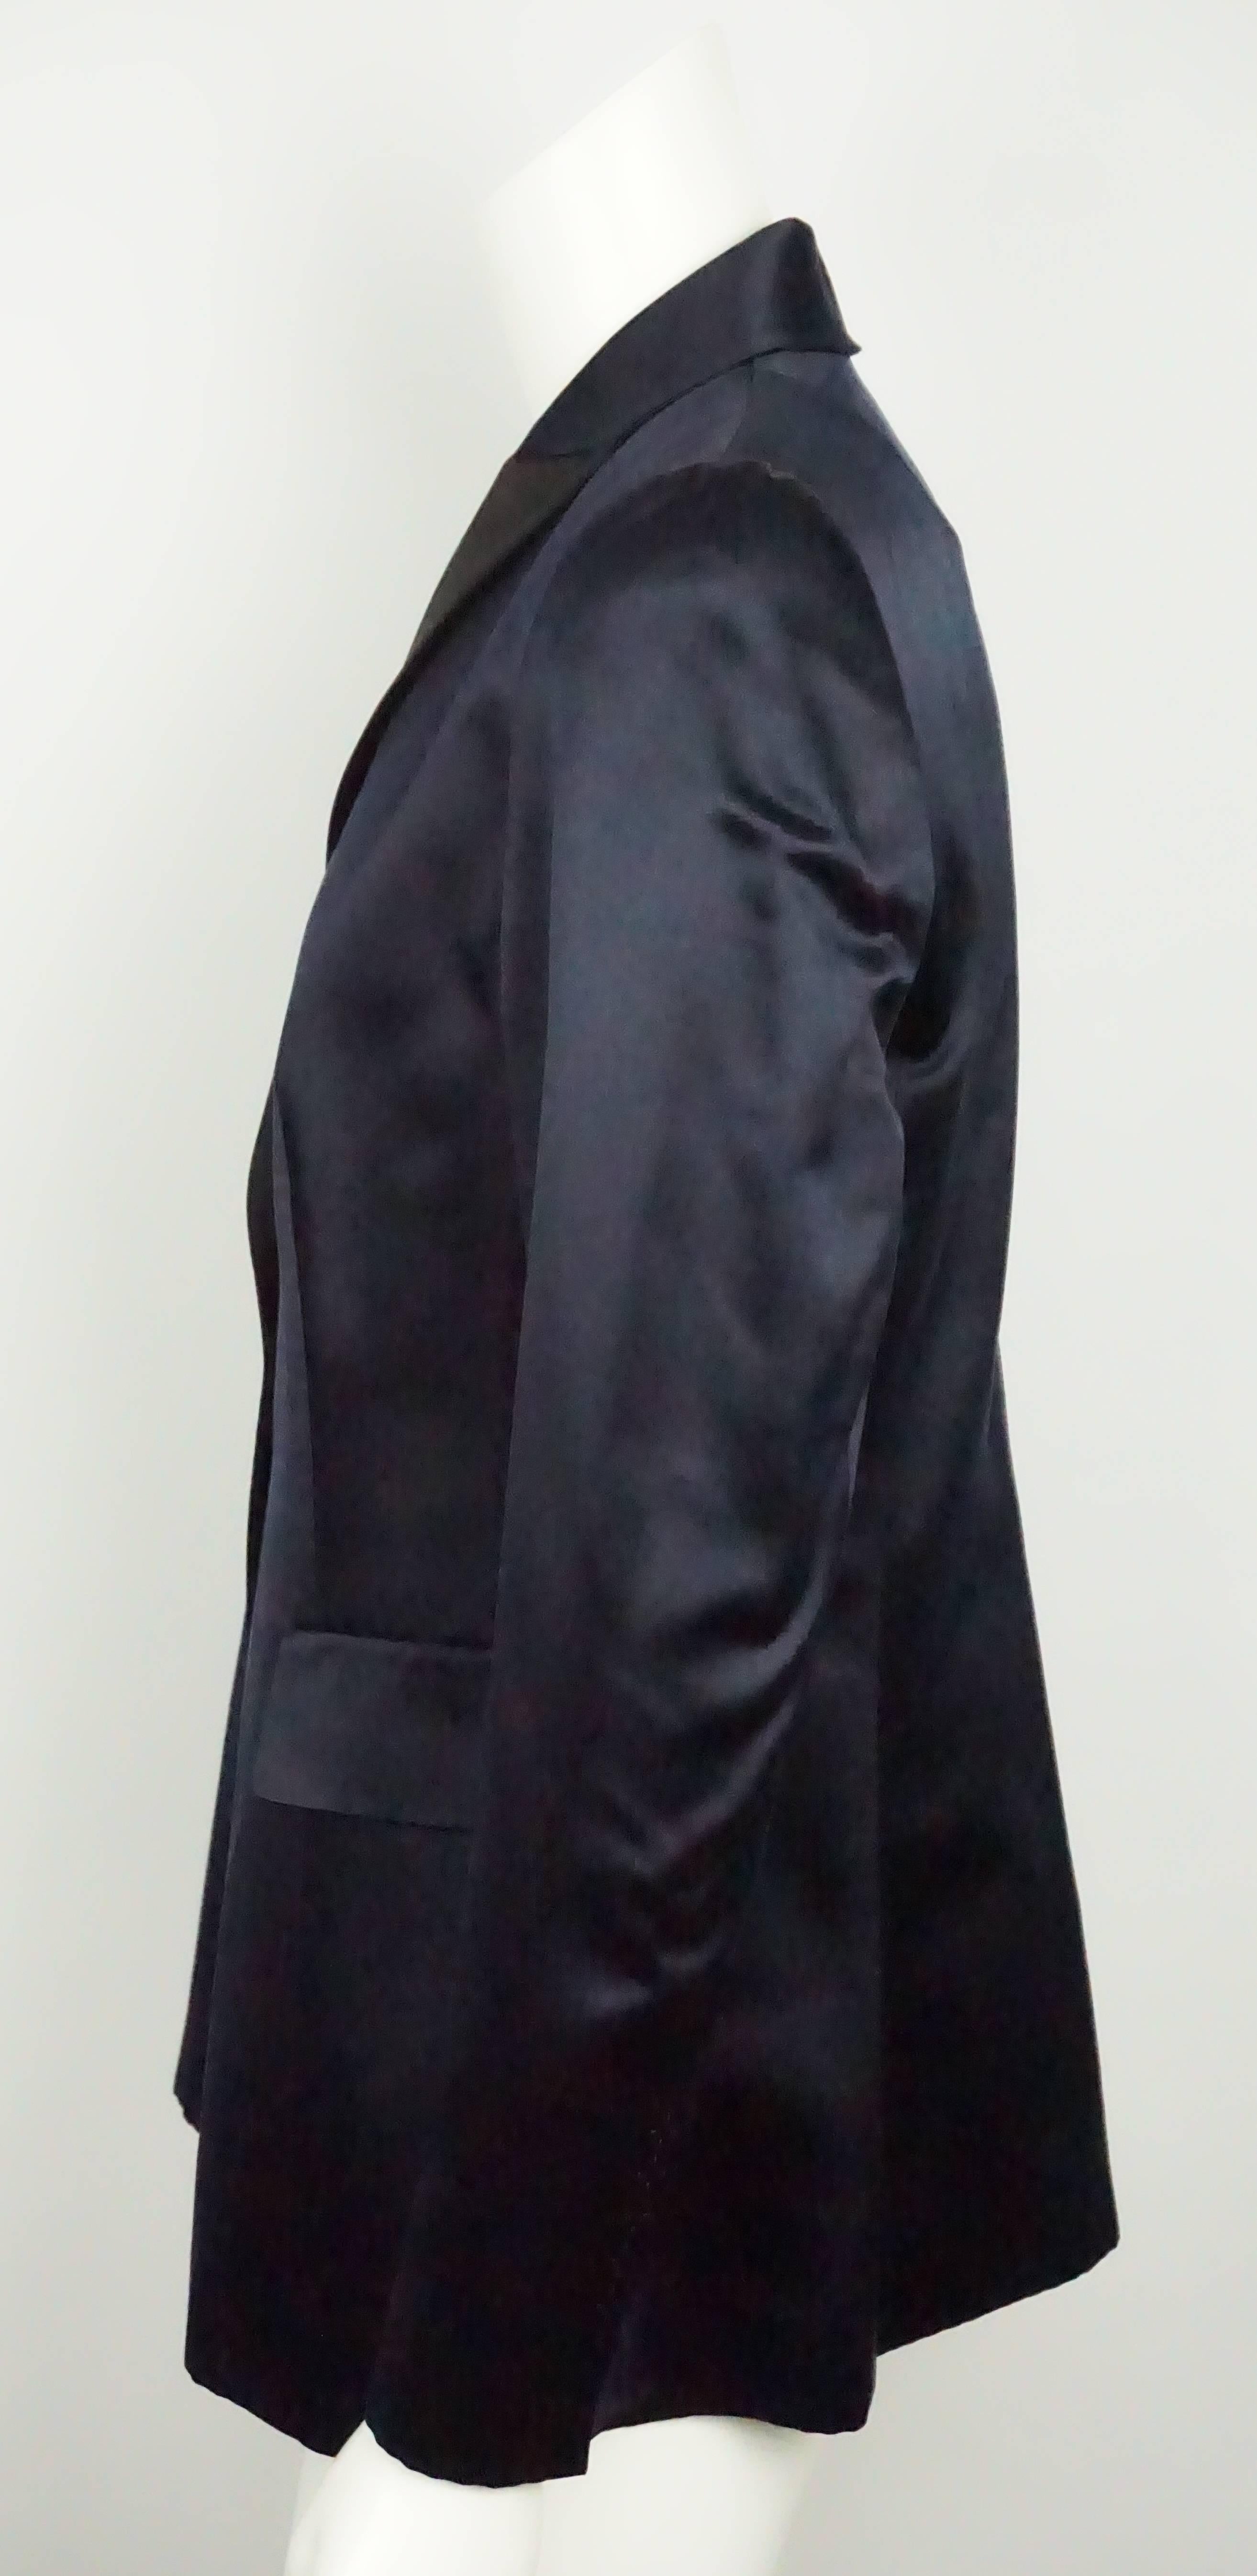 Akris Navy Satin Tuxedo Style Jacket - 10  This traditional silk tuxedo style jacket is in excellent condition. The entire jacket is navy with the exception of the lapel which is black. It has three front flaps that are not functional pockets. The